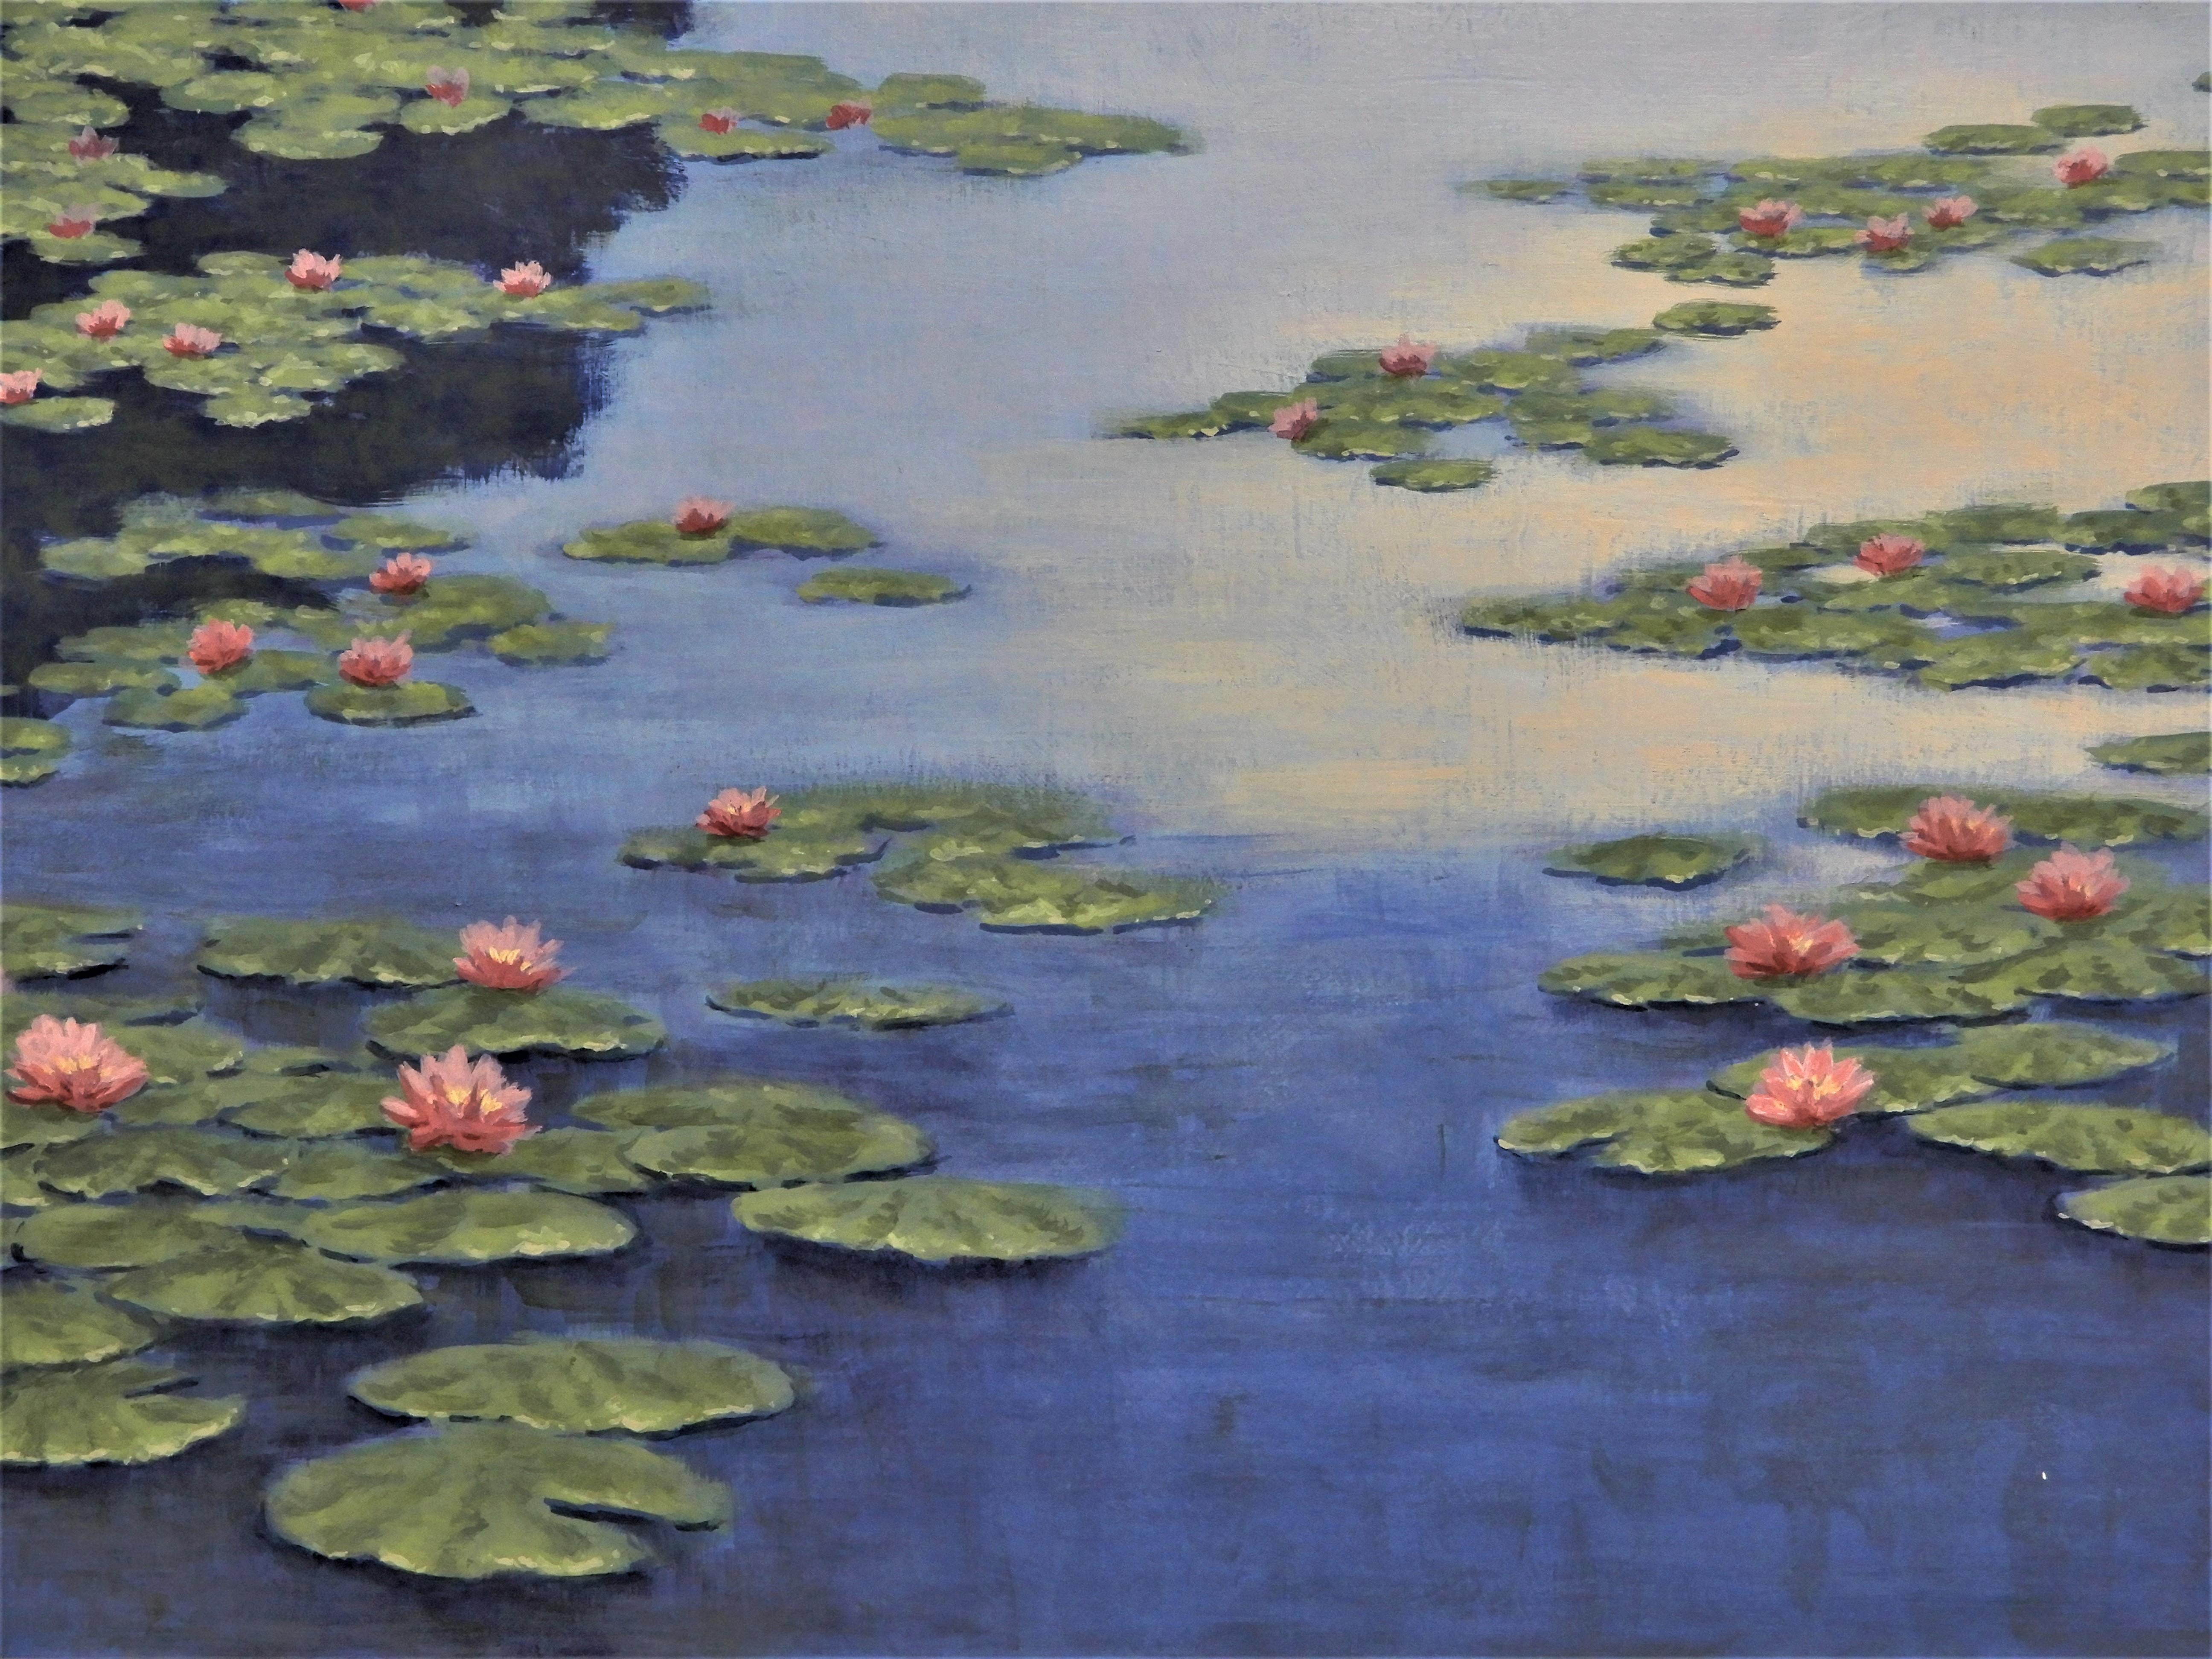 <p>Artist Comments<br />A view of water lilies at sunset. The last light of the day is fading off of the still pond as abstracted evening shadows move across the surface. 